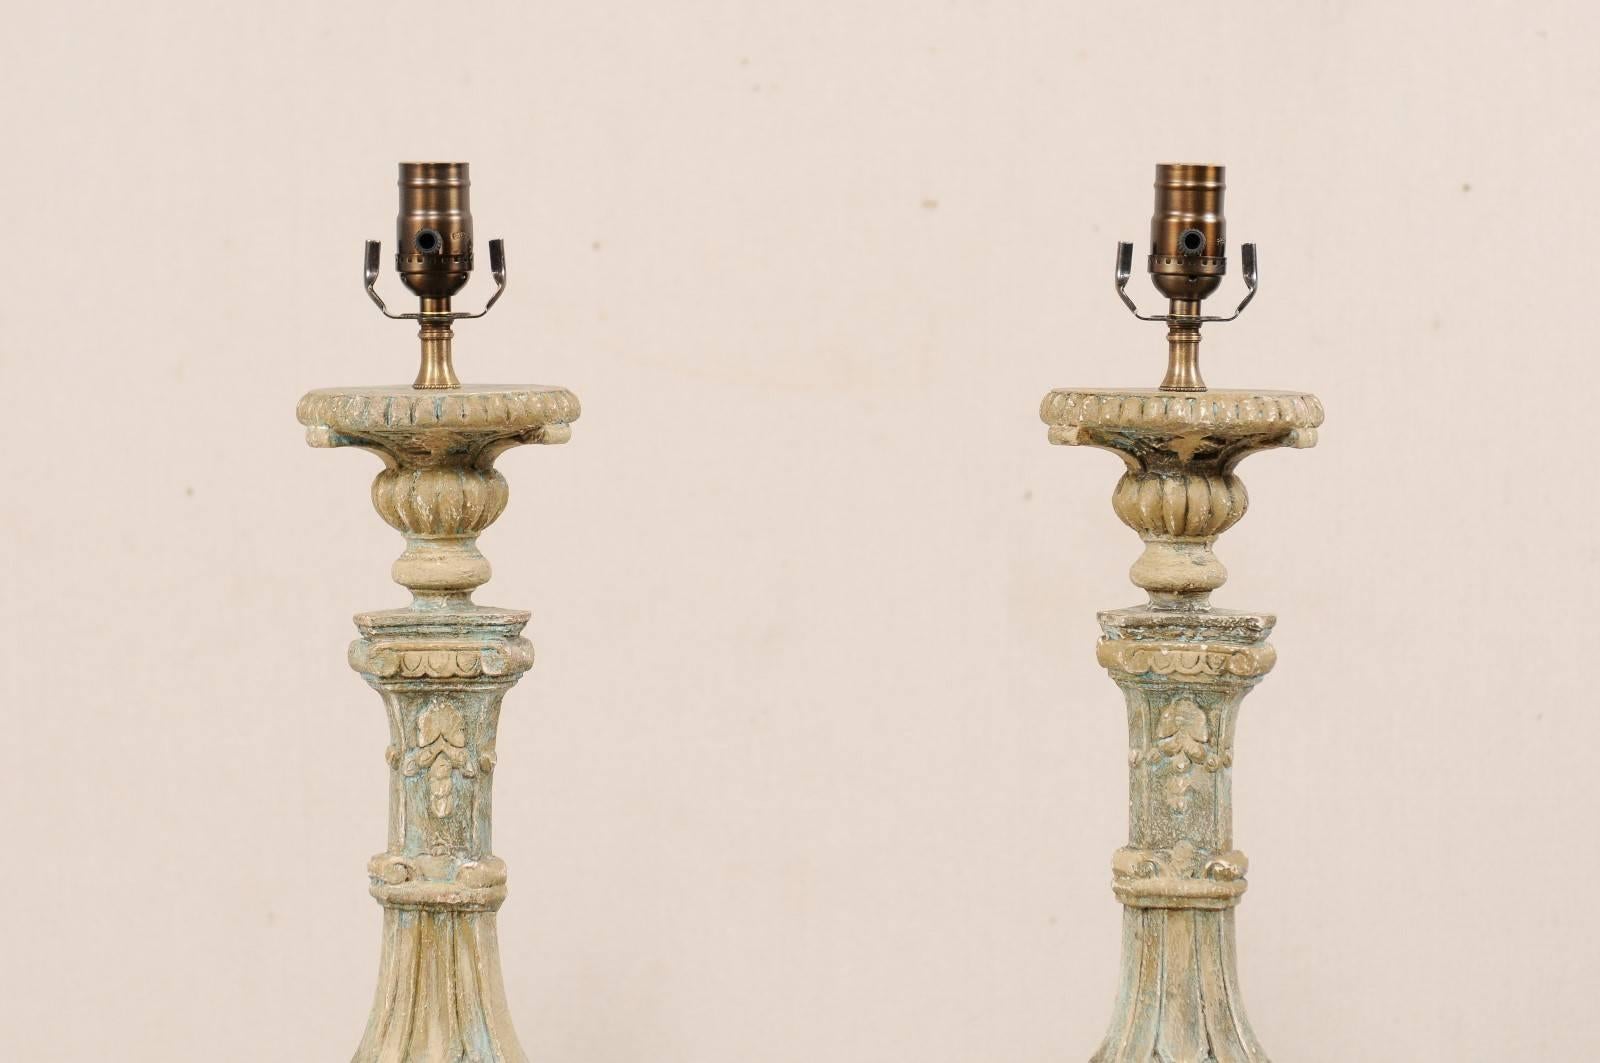 Indonesian Pair of Italian Style Ornate Hand-Carved and Painted Tall Table Lamps